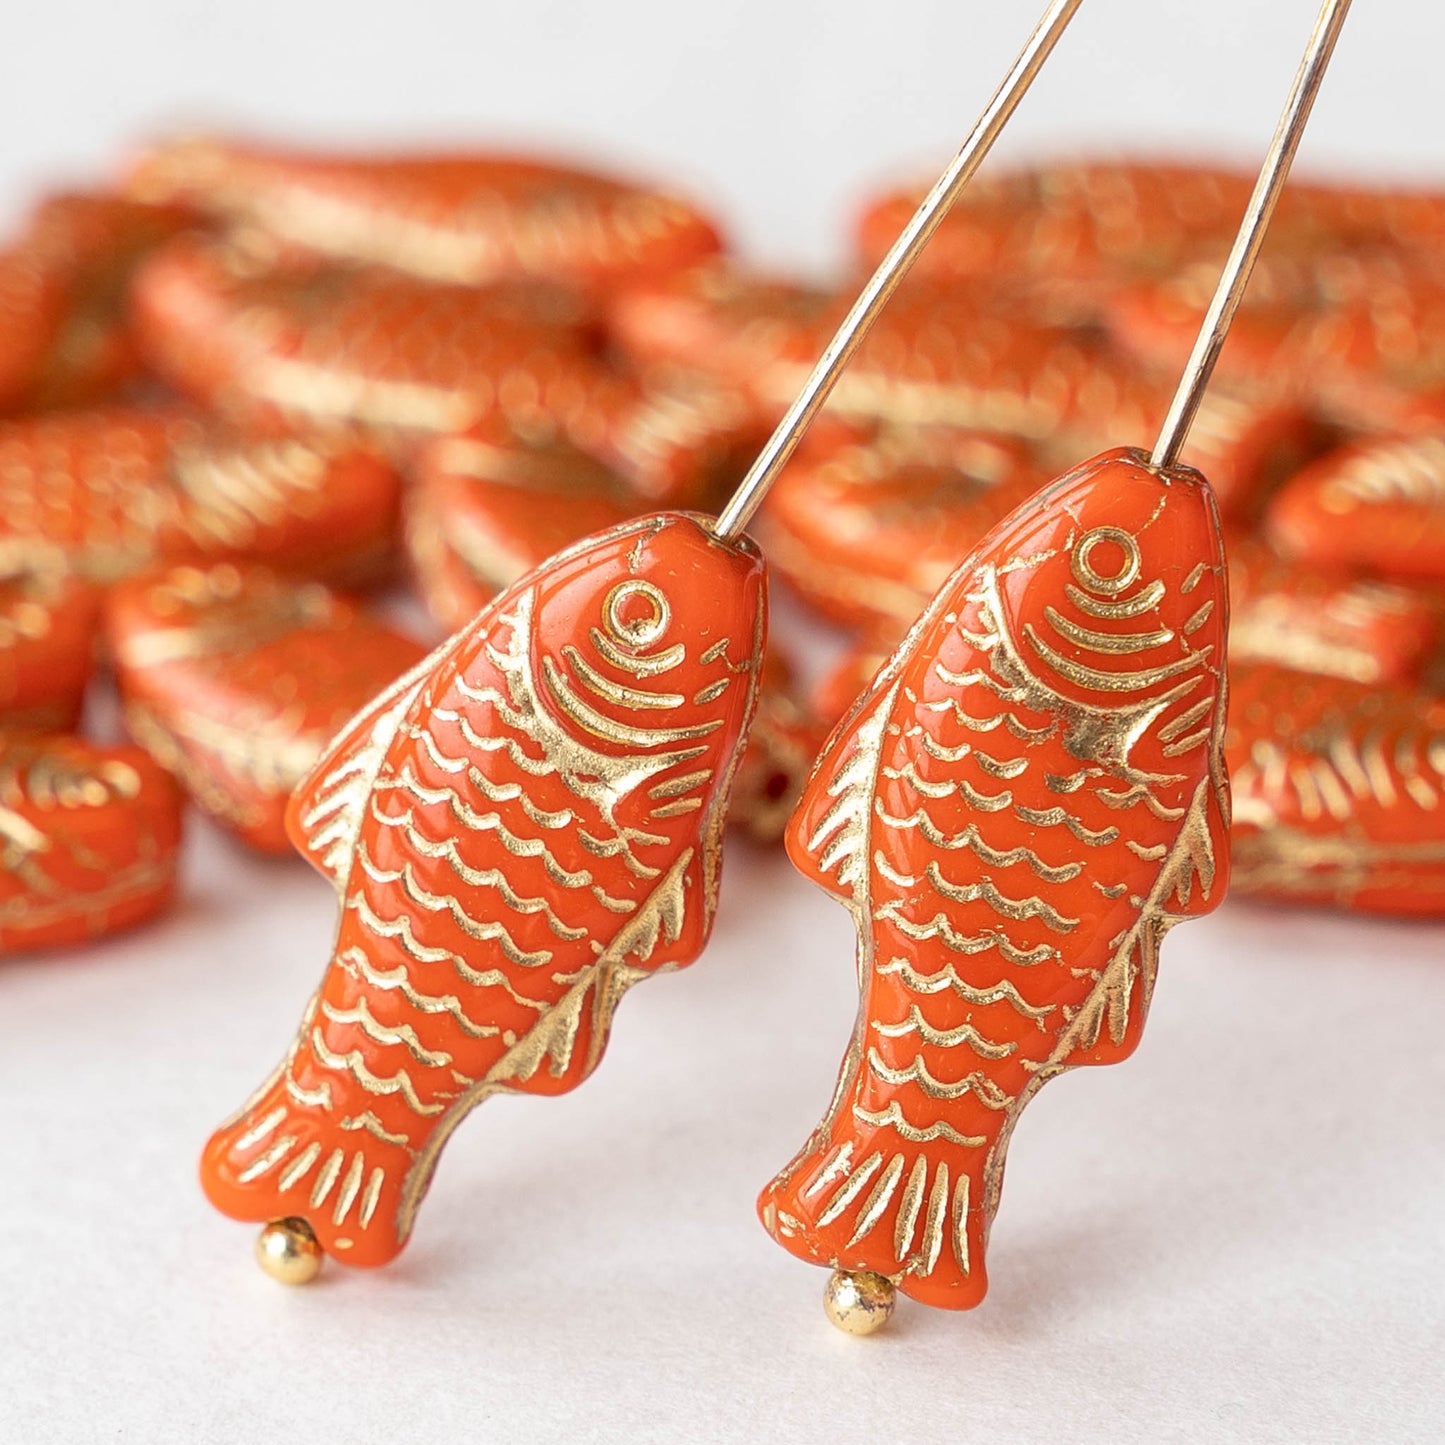 Glass Fish Beads - Opaque Orange with Gold - 6 or 12